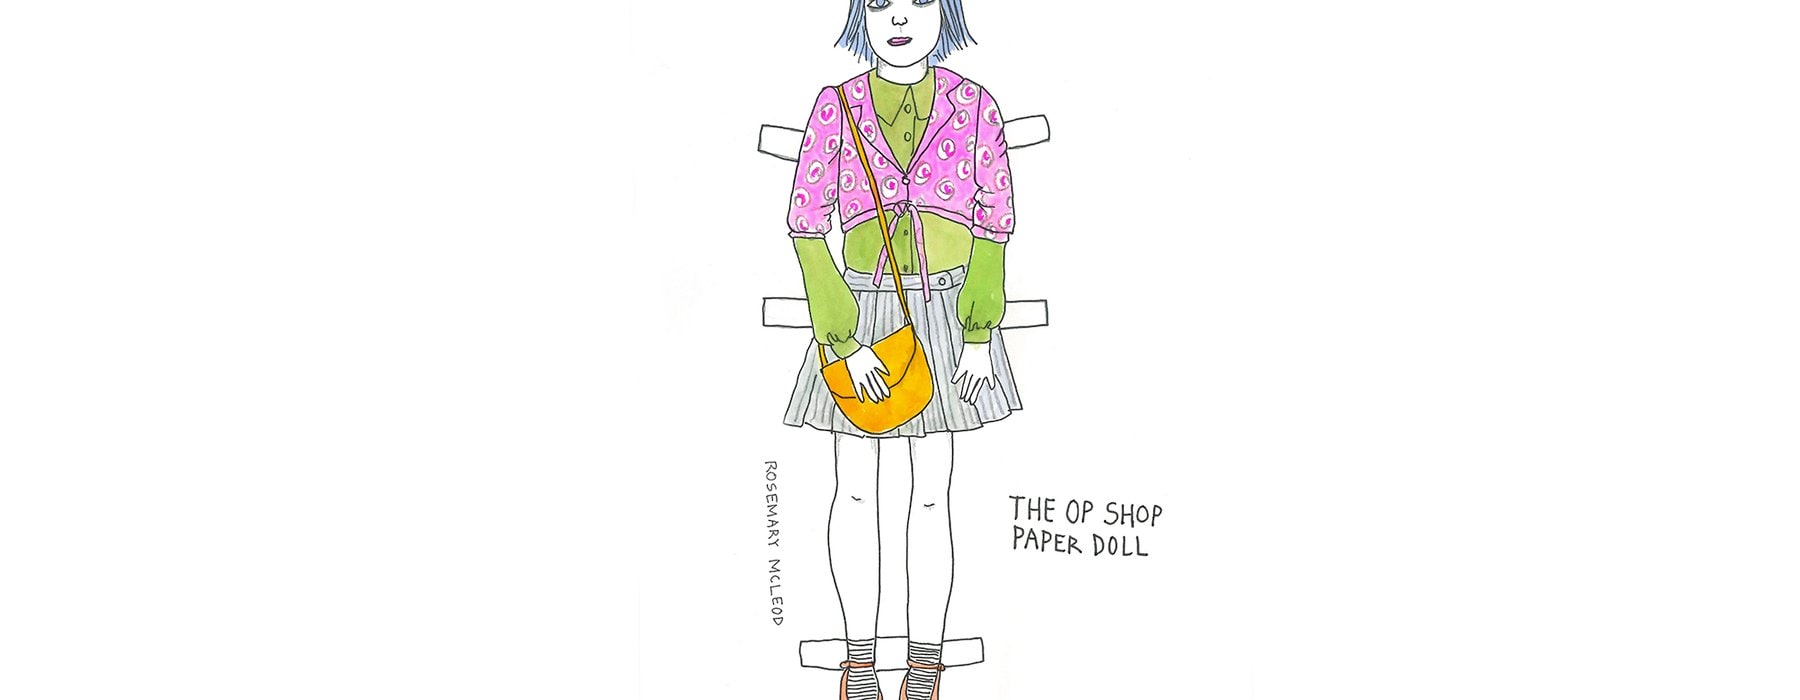 Illustration of a girl wearing assorted fashion with the caption The Op Shop Paper Doll next to it